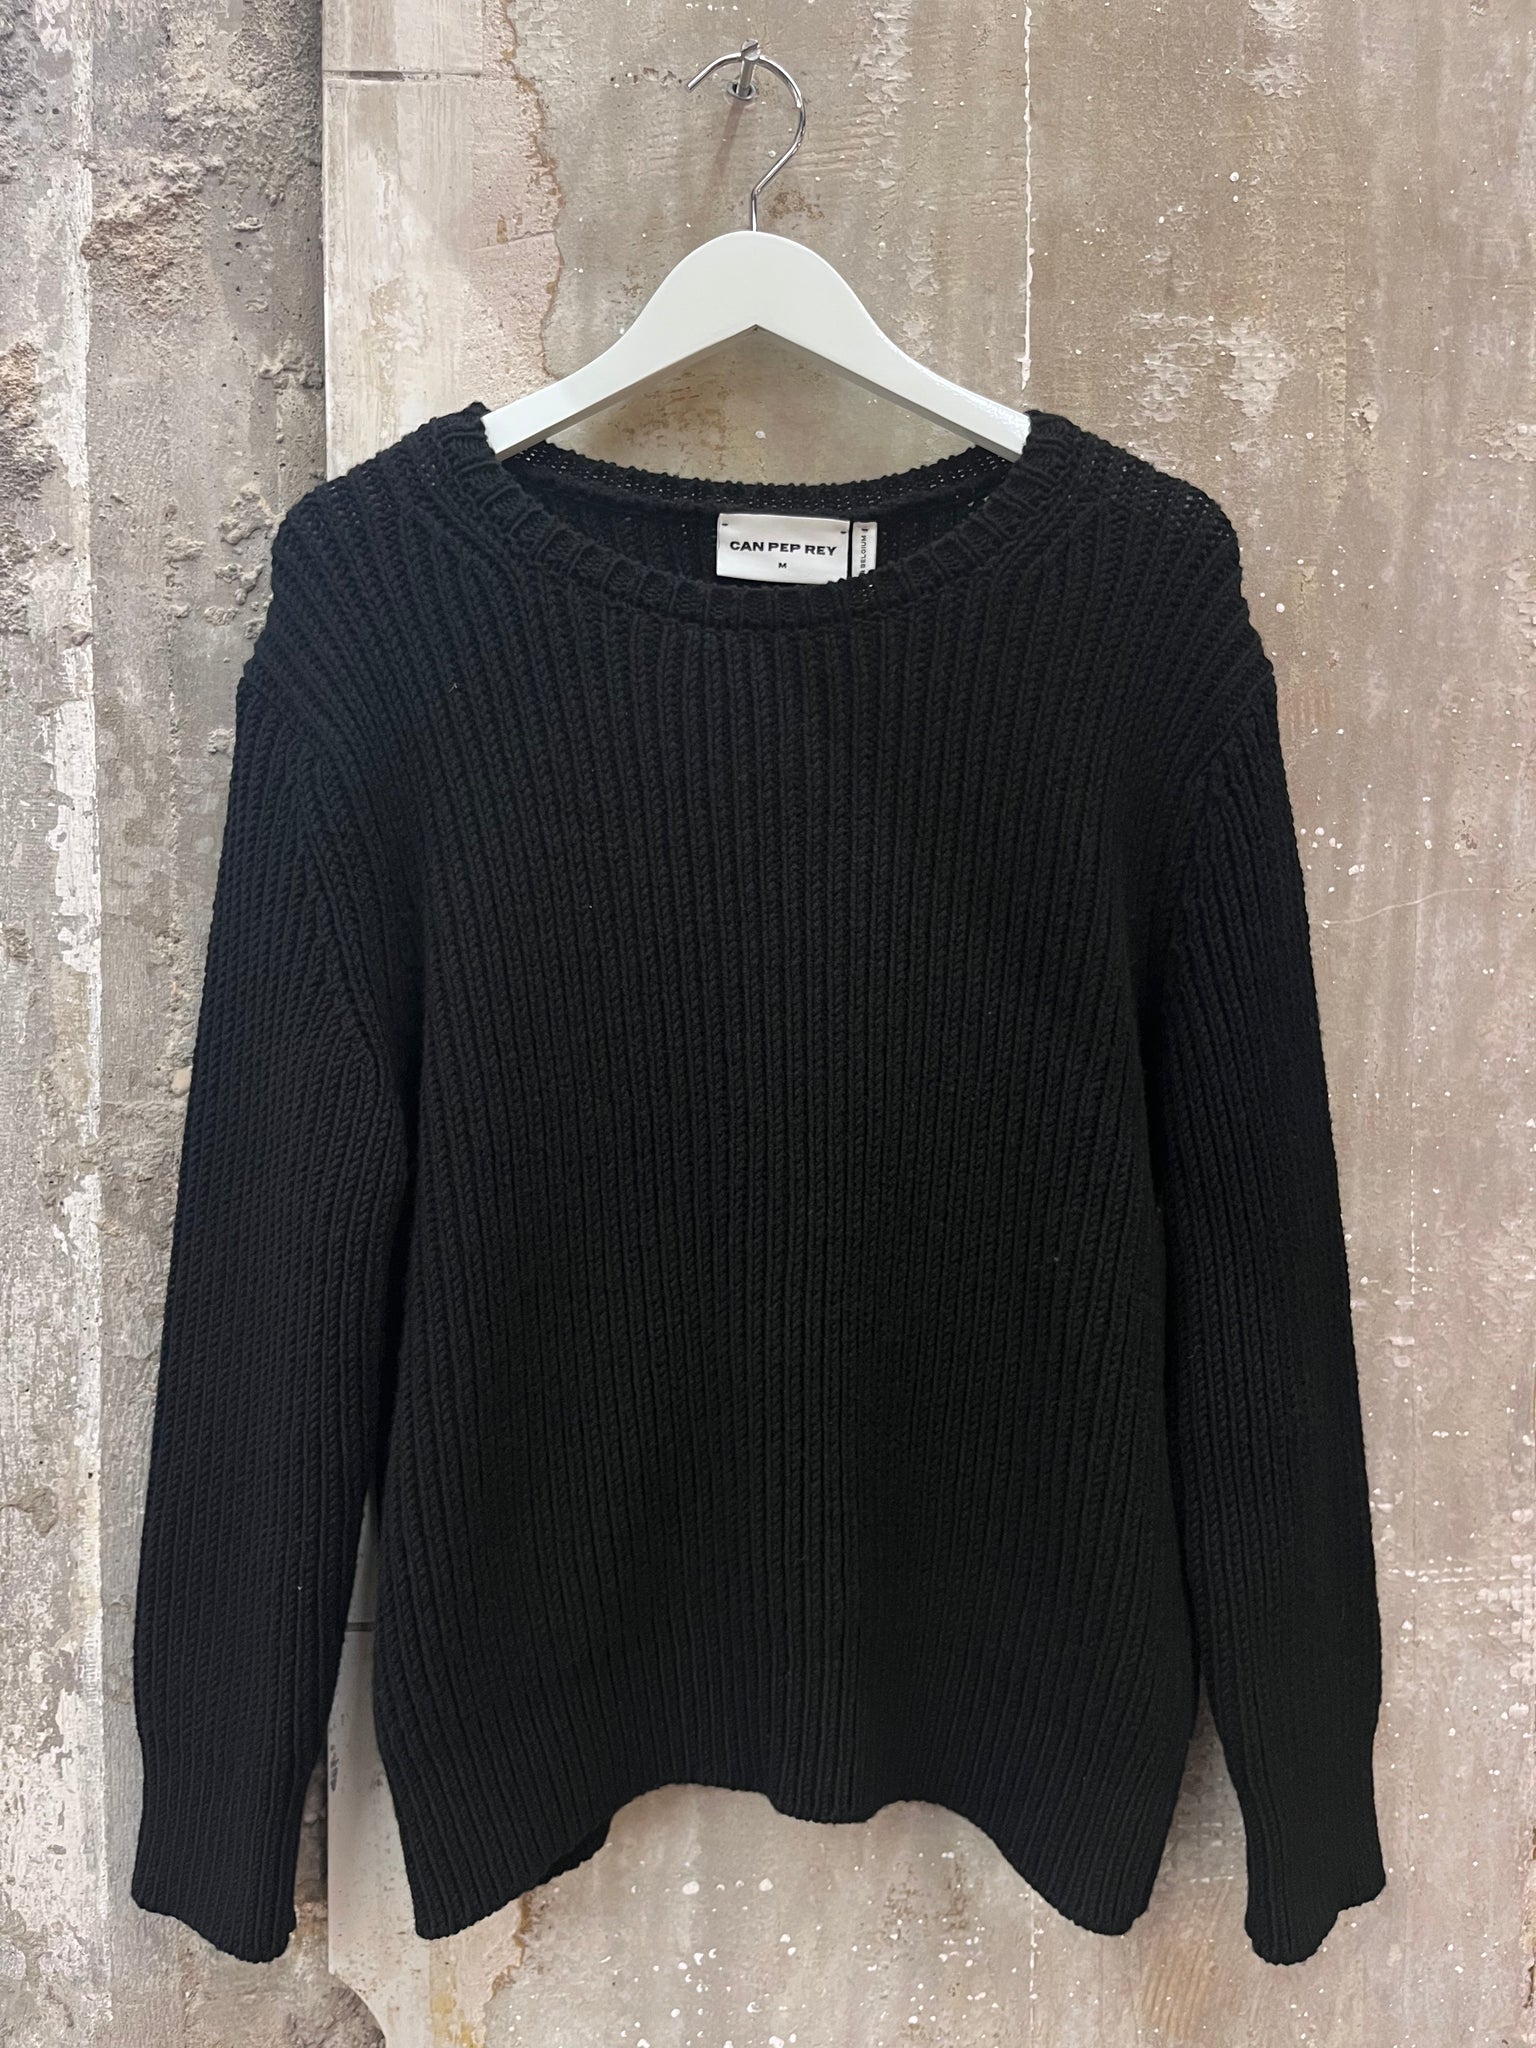 Chunky knit pullover in black by can pep rey